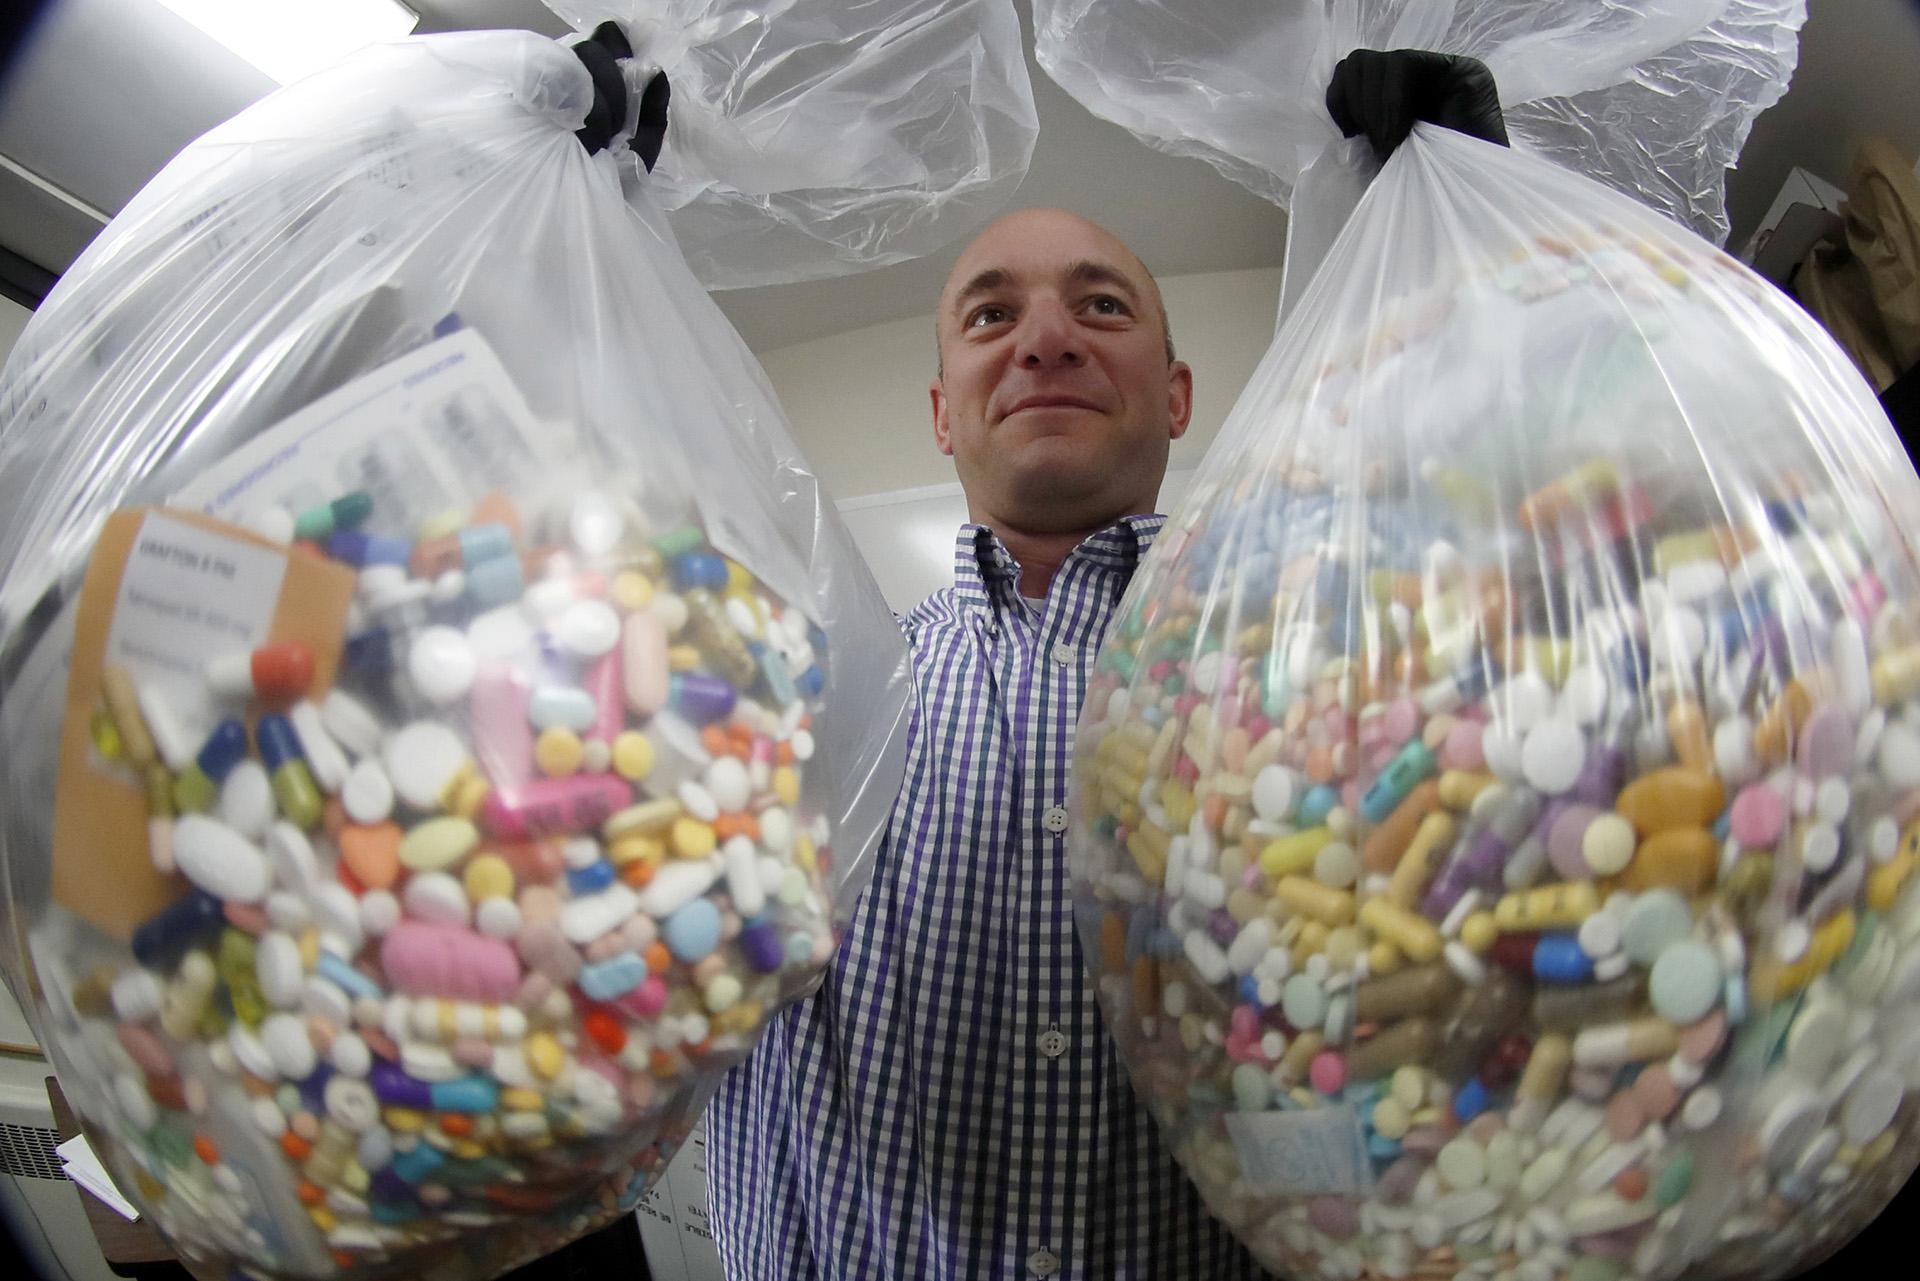 Narcotics detective Ben Hill, with the Barberton Police Department, shows two bags of medications that are stored in their headquarters and slated for destruction, Wednesday, Sept. 11, 2019, in Barberton, Ohio. (AP Photo / Keith Srakocic)